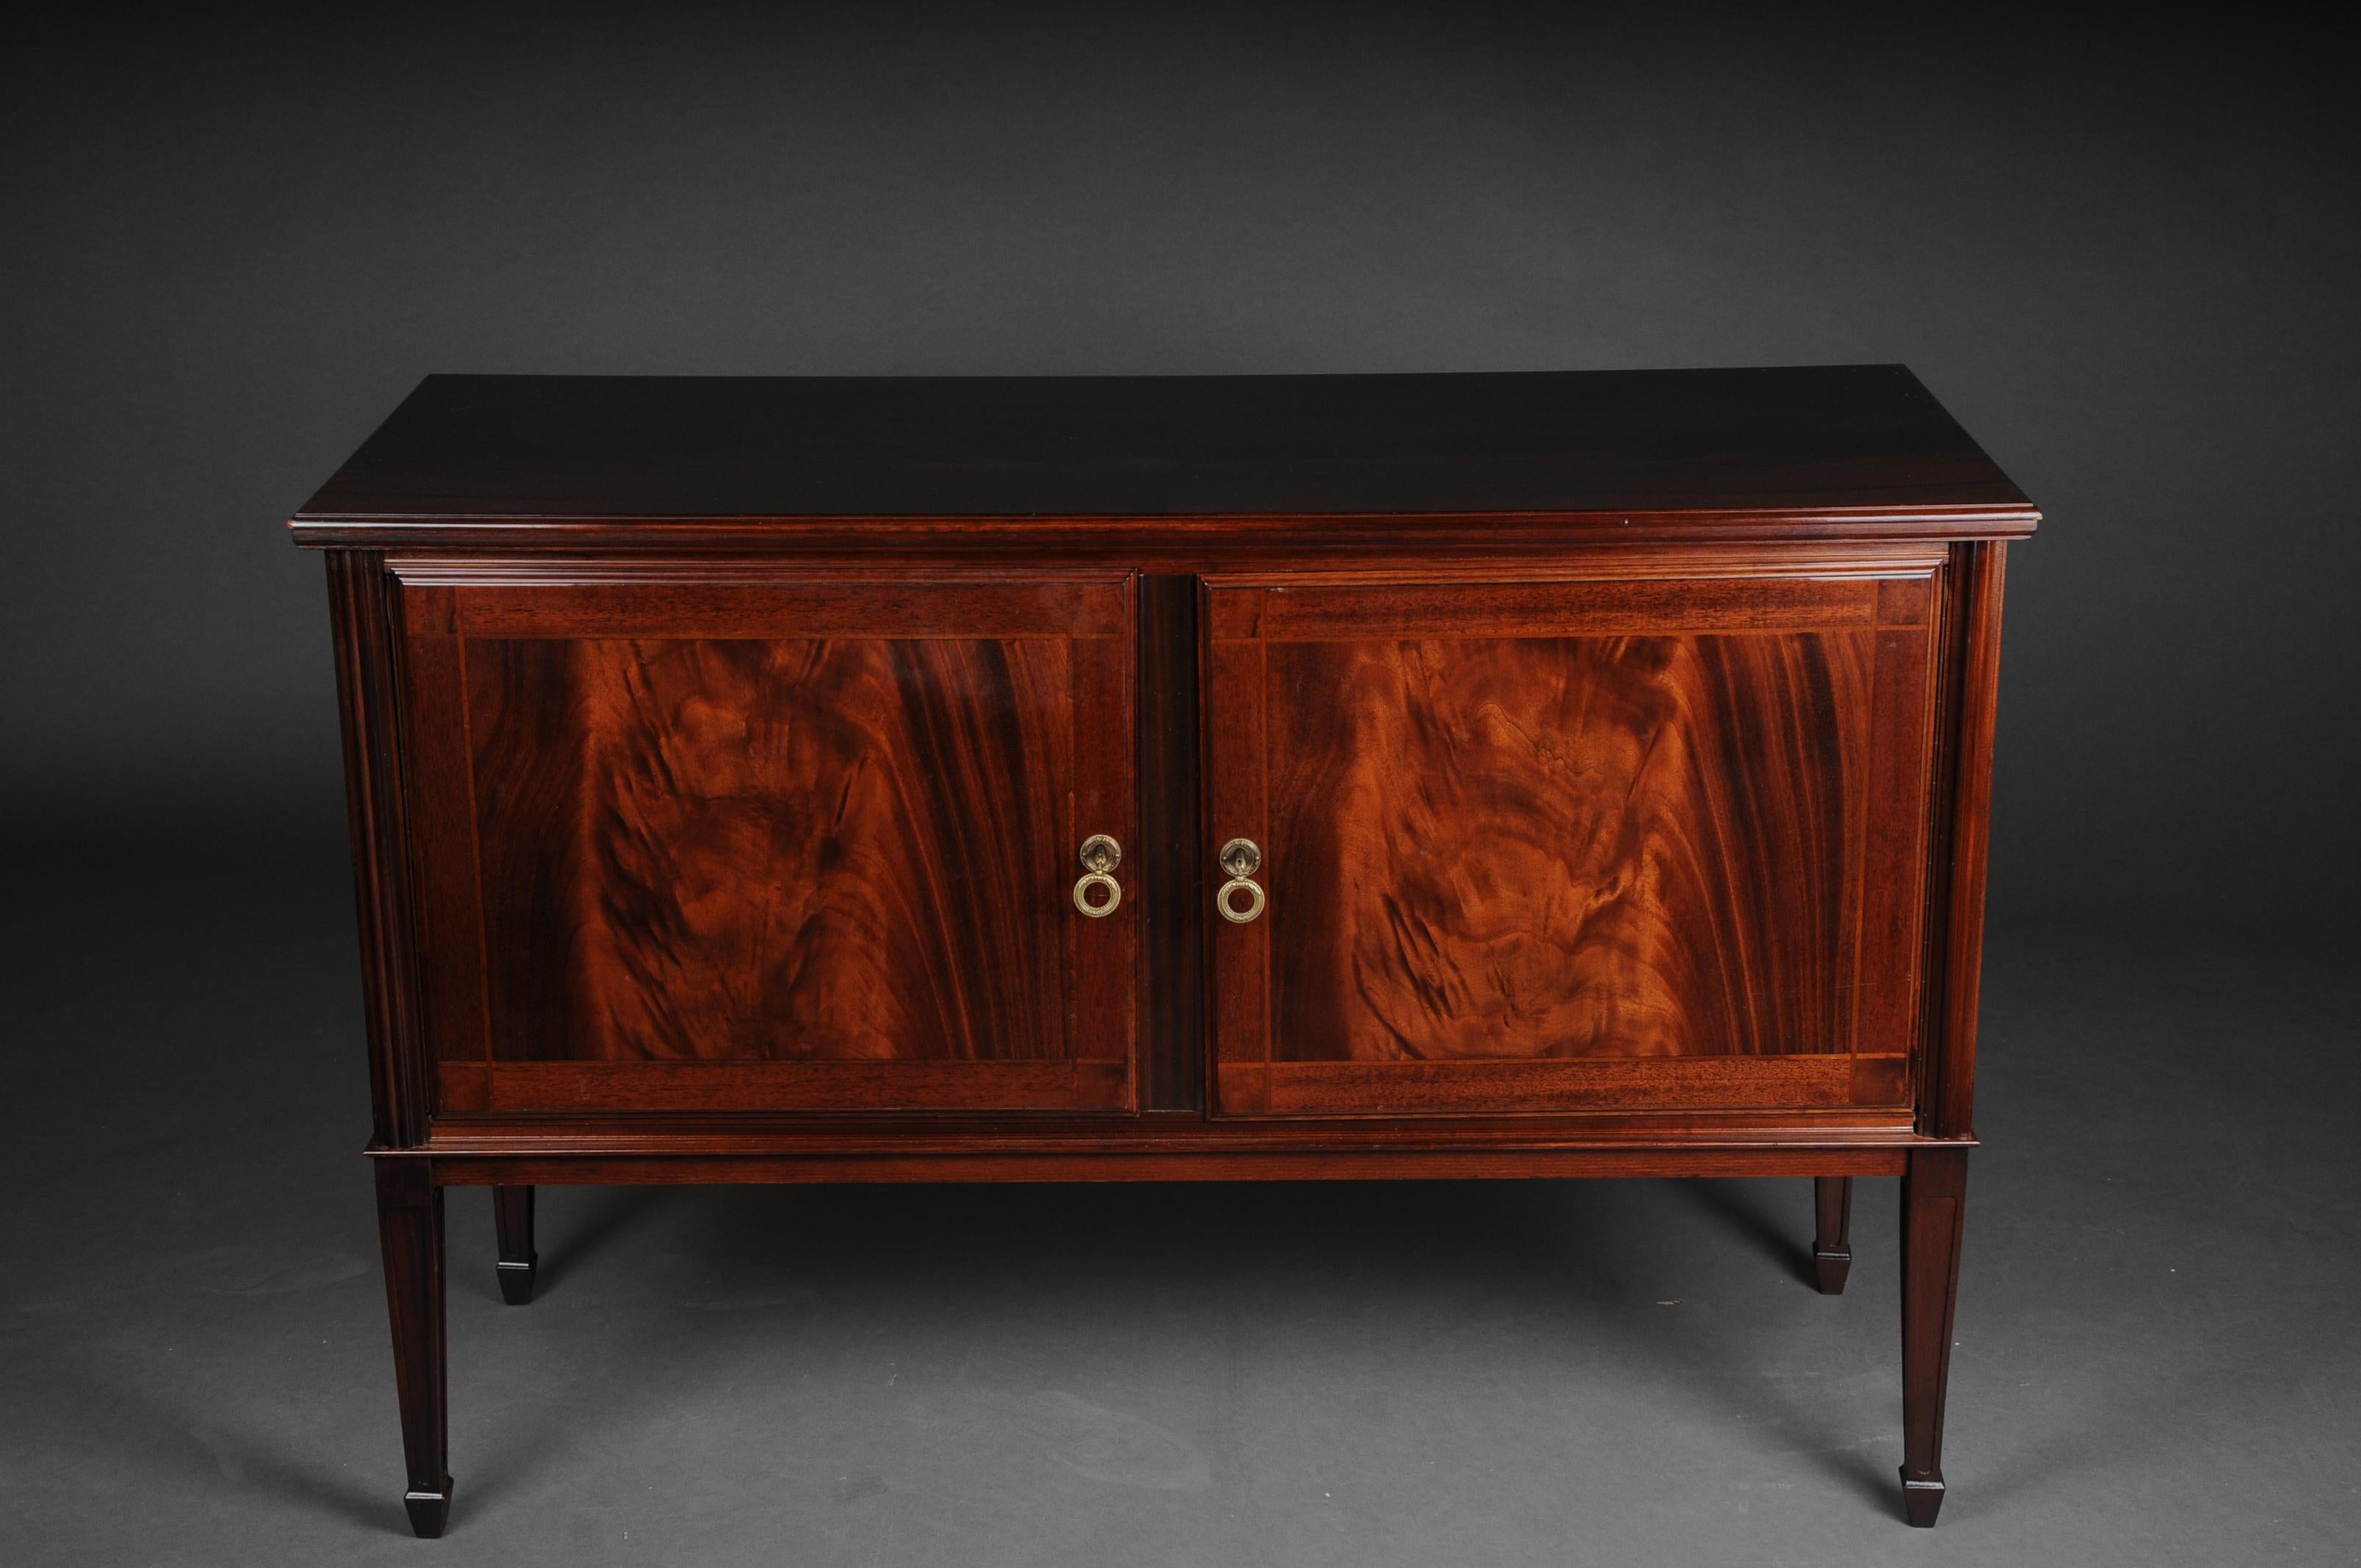 Nice English sideboard / chest of drawers 20th century

Solid wood with mahogany veneer. English chest of drawers, 20th century 19th century, Victorian. Slightly protruding cover plate with two doors, England, 20th century

(D-99).